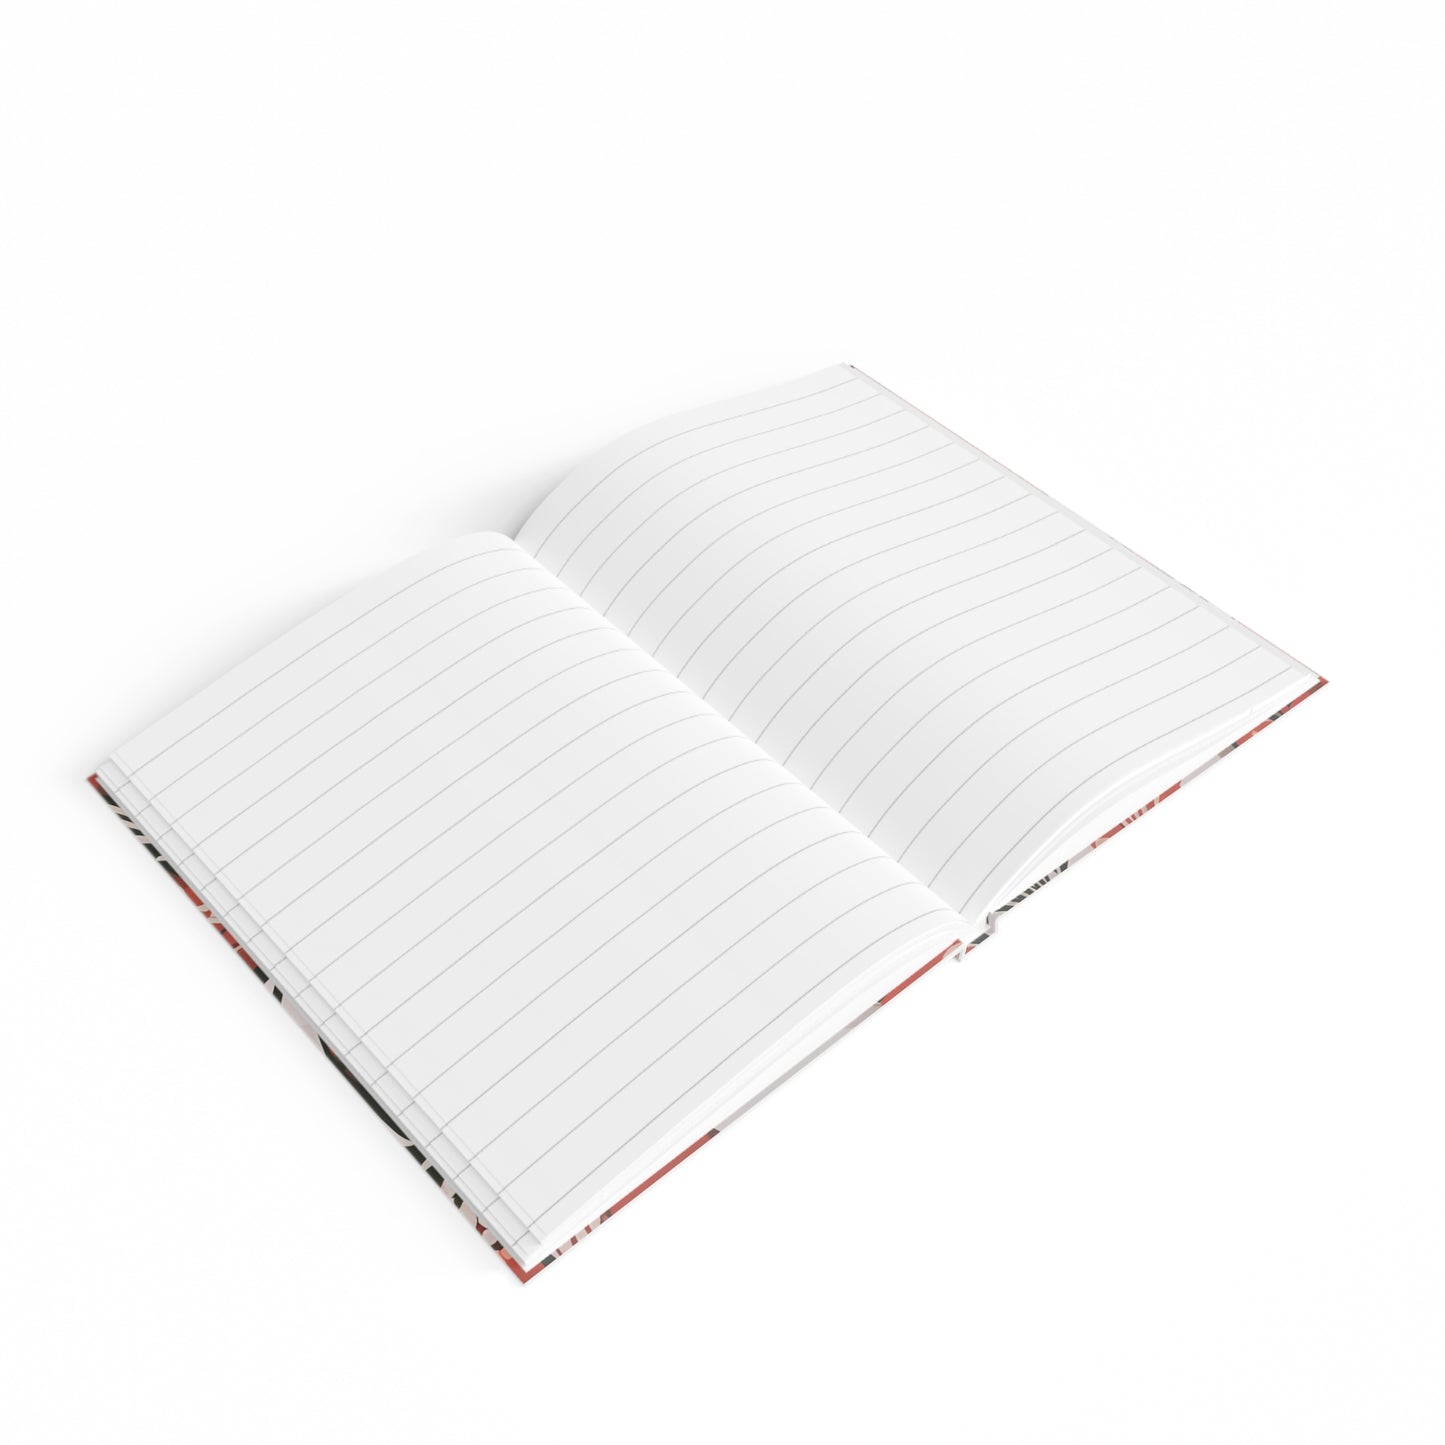 White Cats, Hardcover Notebook Journal - Write in Style